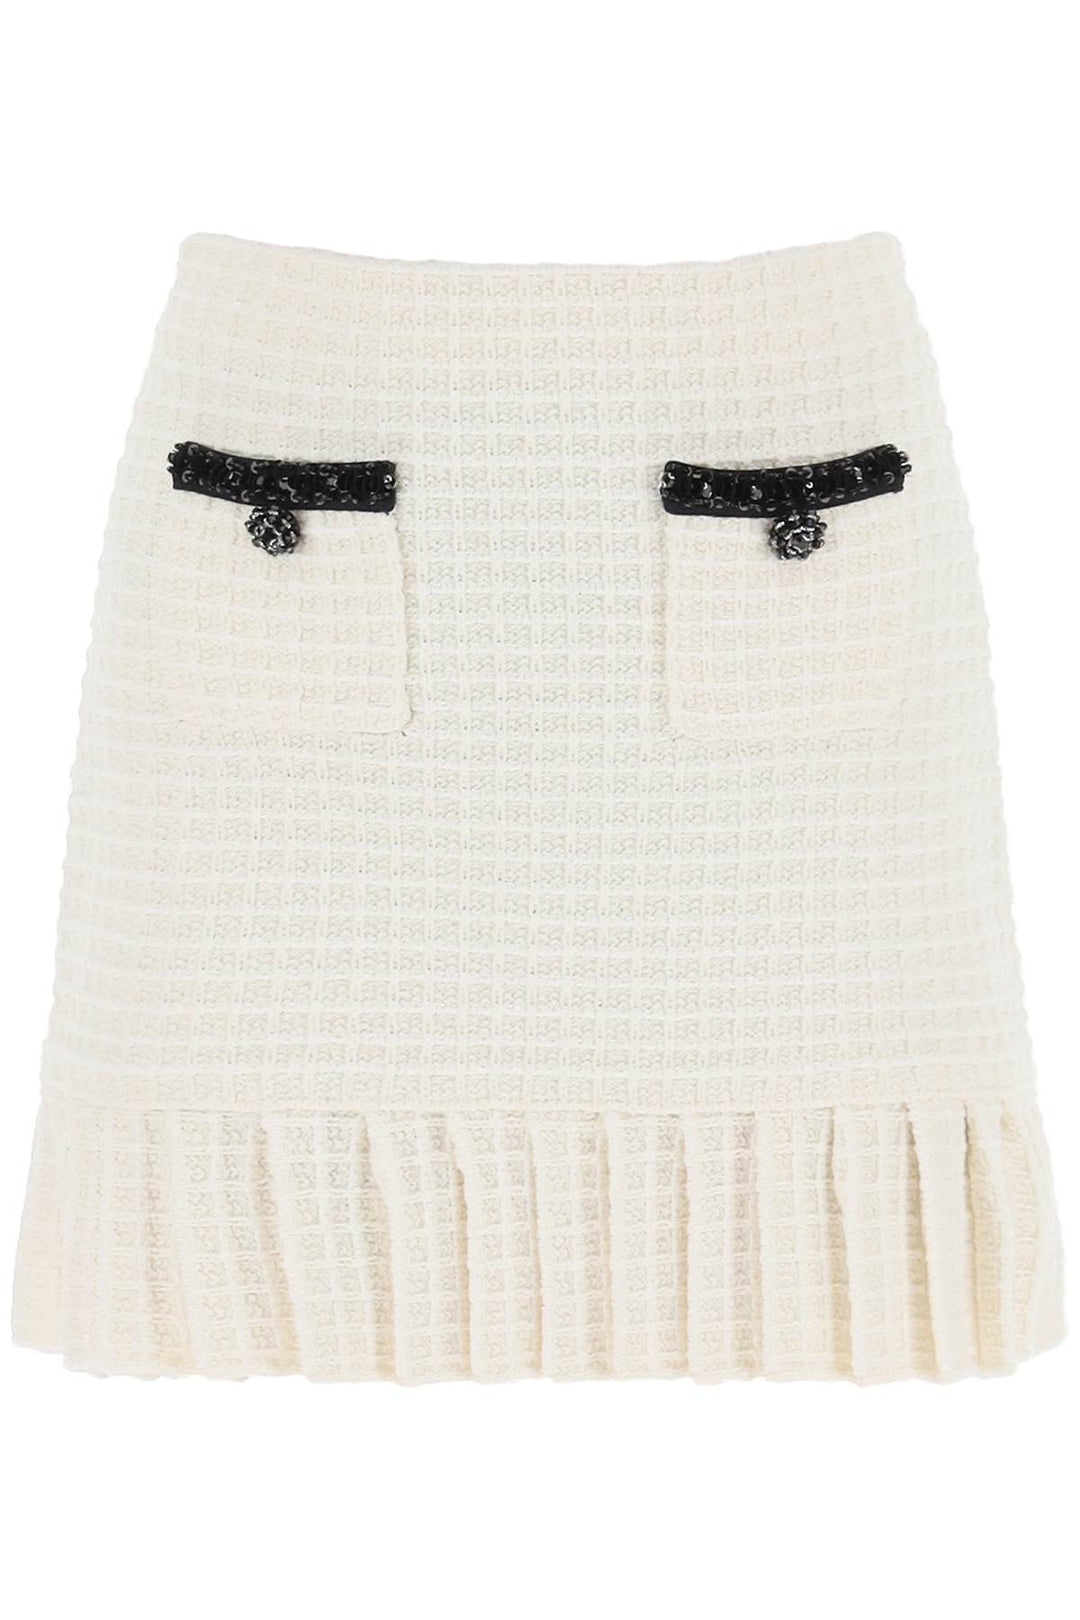 Self Portrait Knitted Mini Skirt With Sequins   Bianco